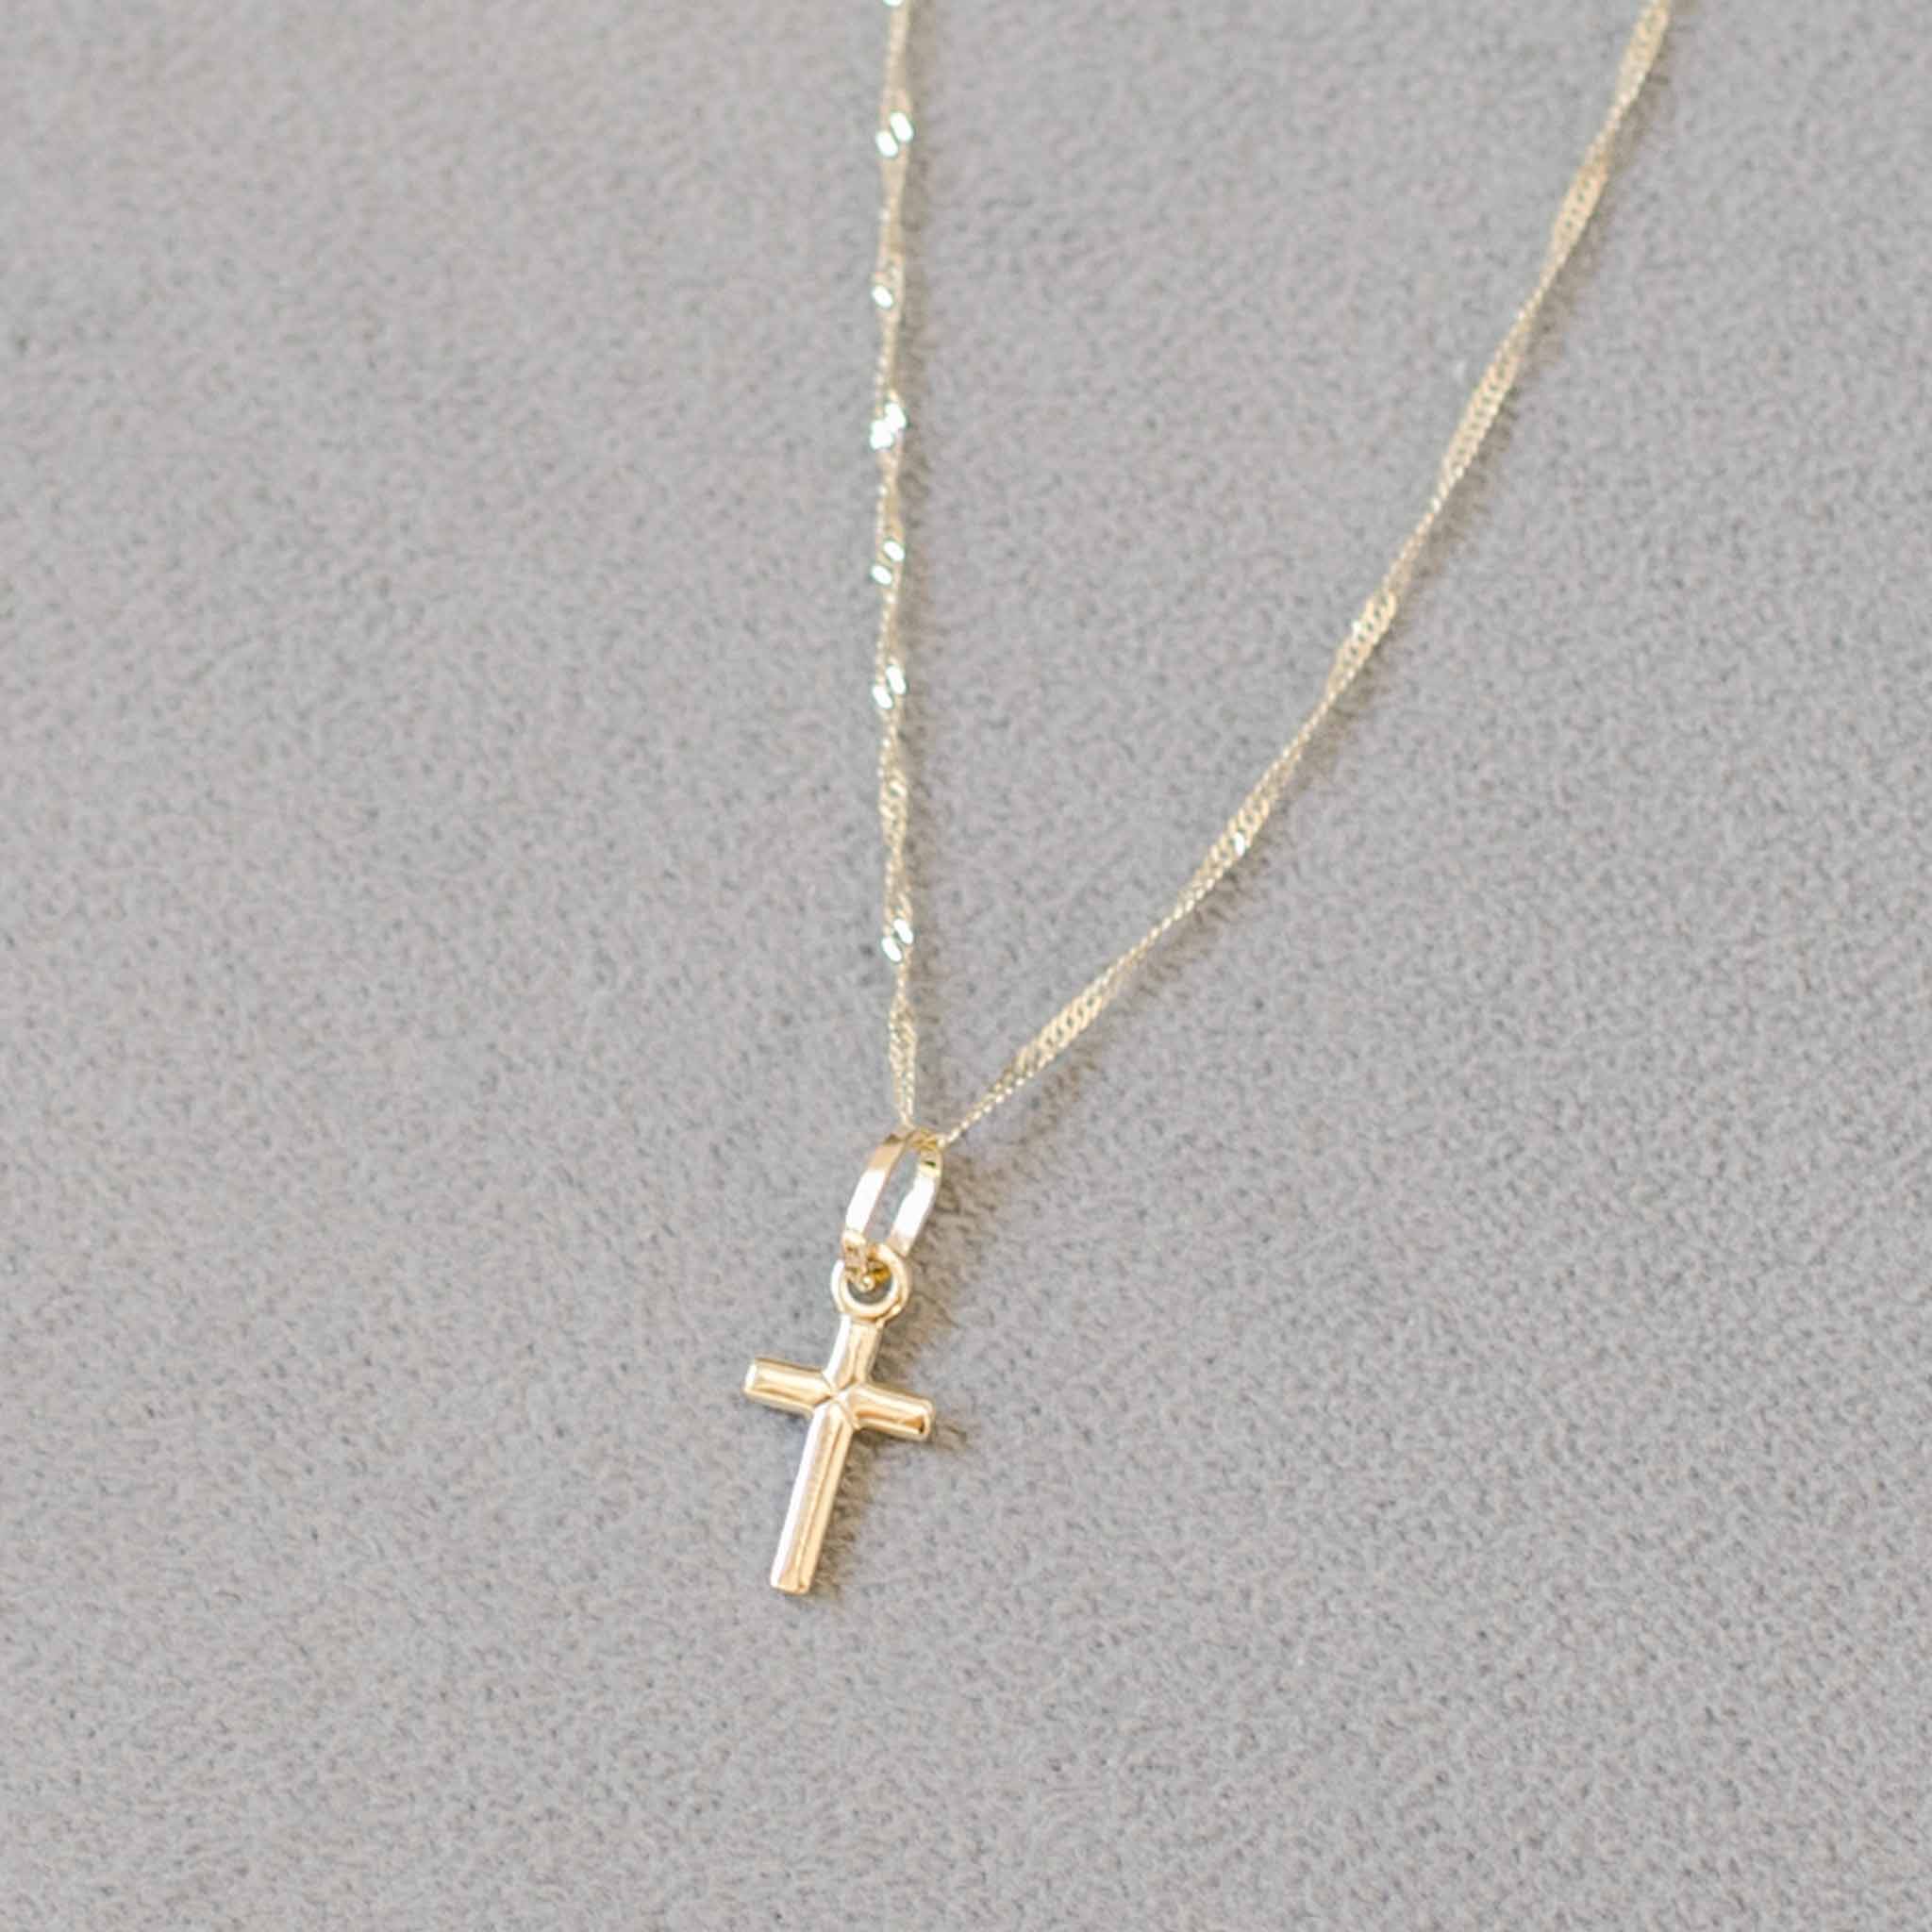 Silver Christening Cross Necklace